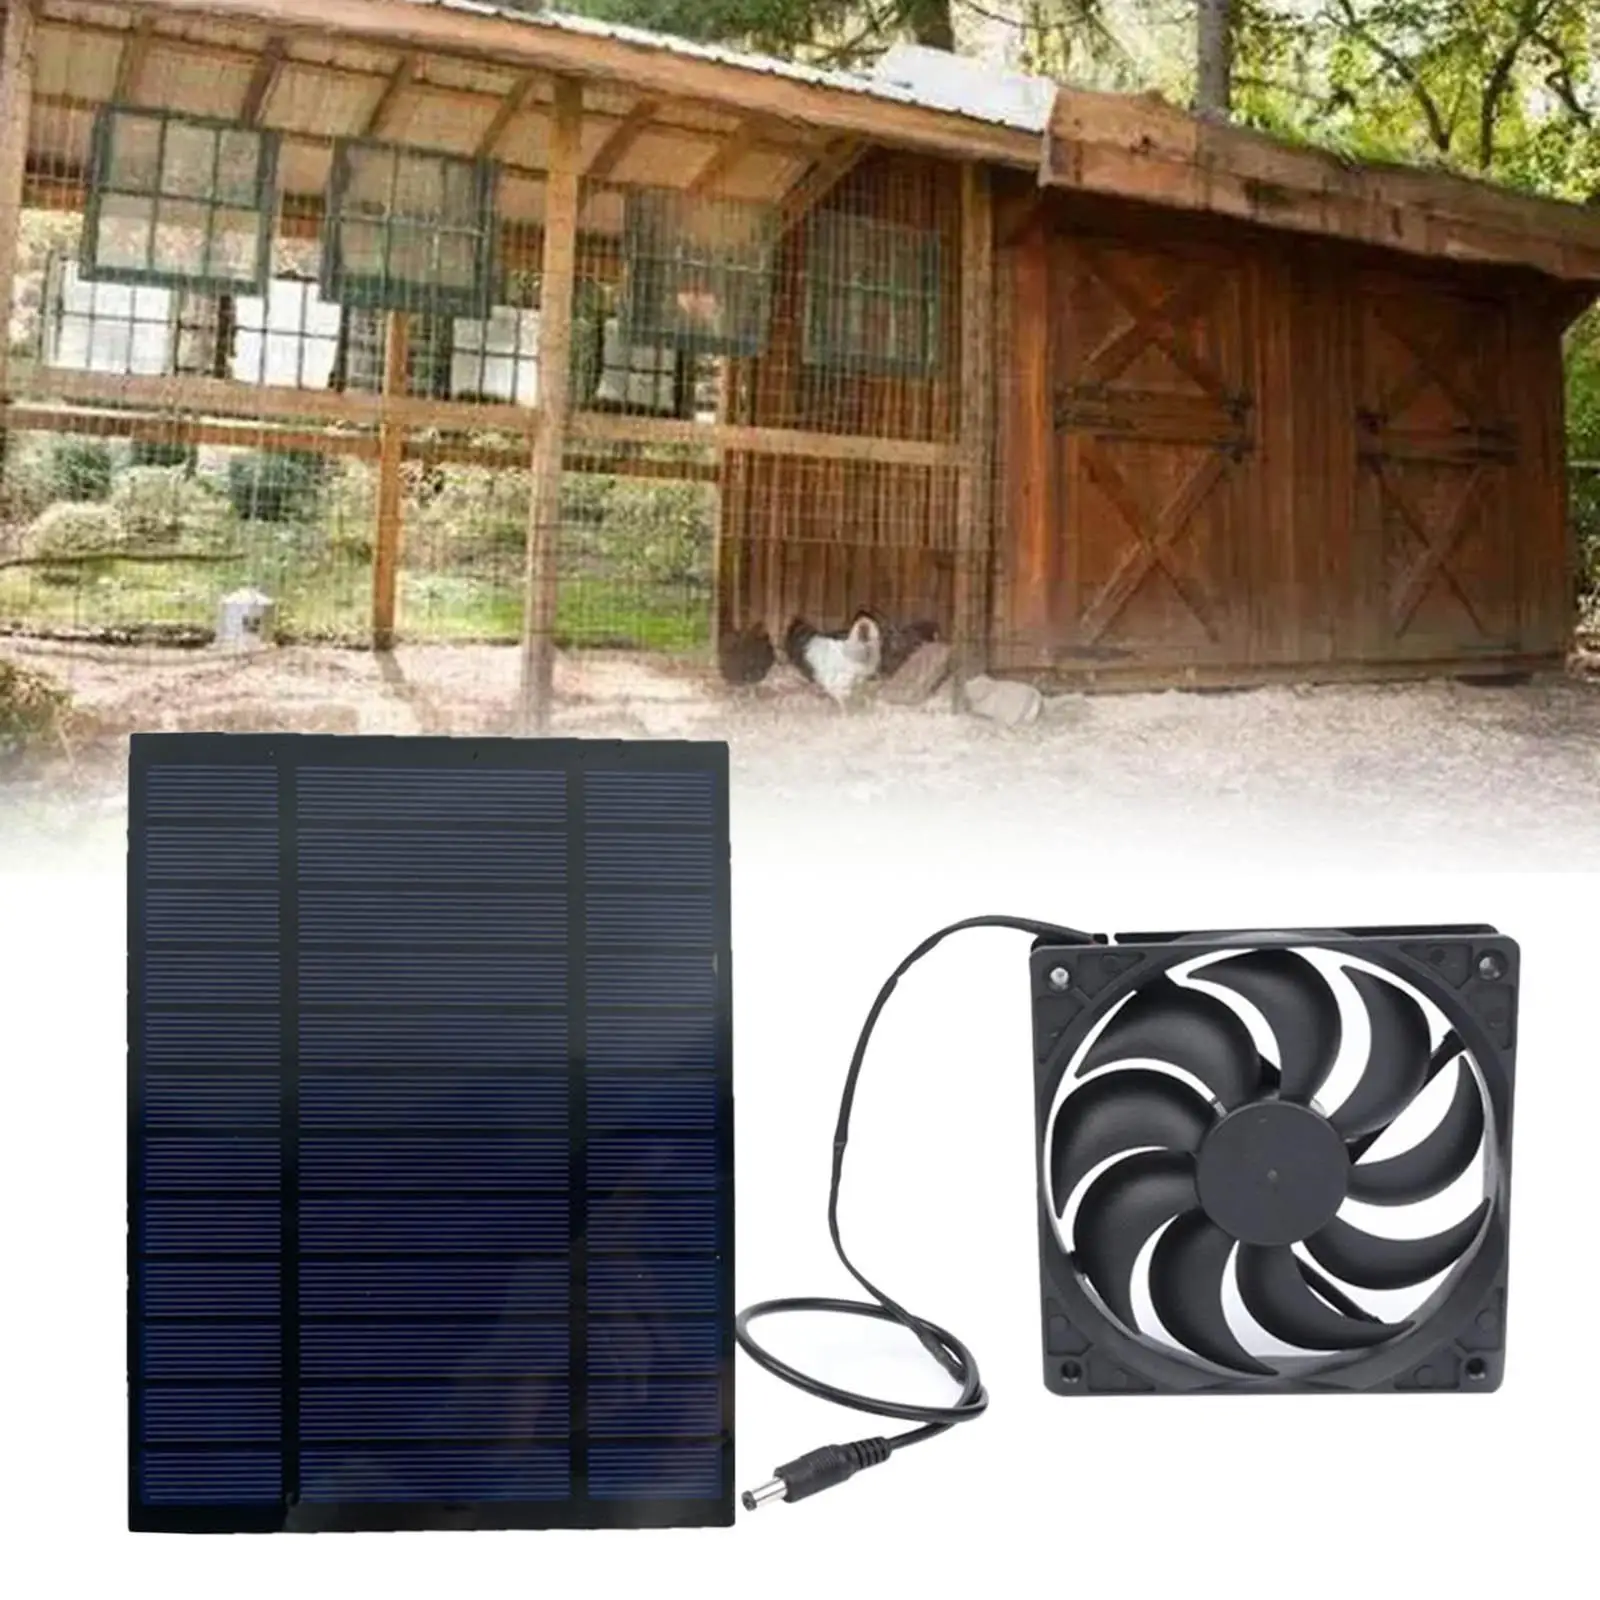 Free Energy Solar Powered Panel Fan Solar Panel Powered Outdoor Ventilator Fans for Chicken Coop Travelling Pet Dog House Sheds